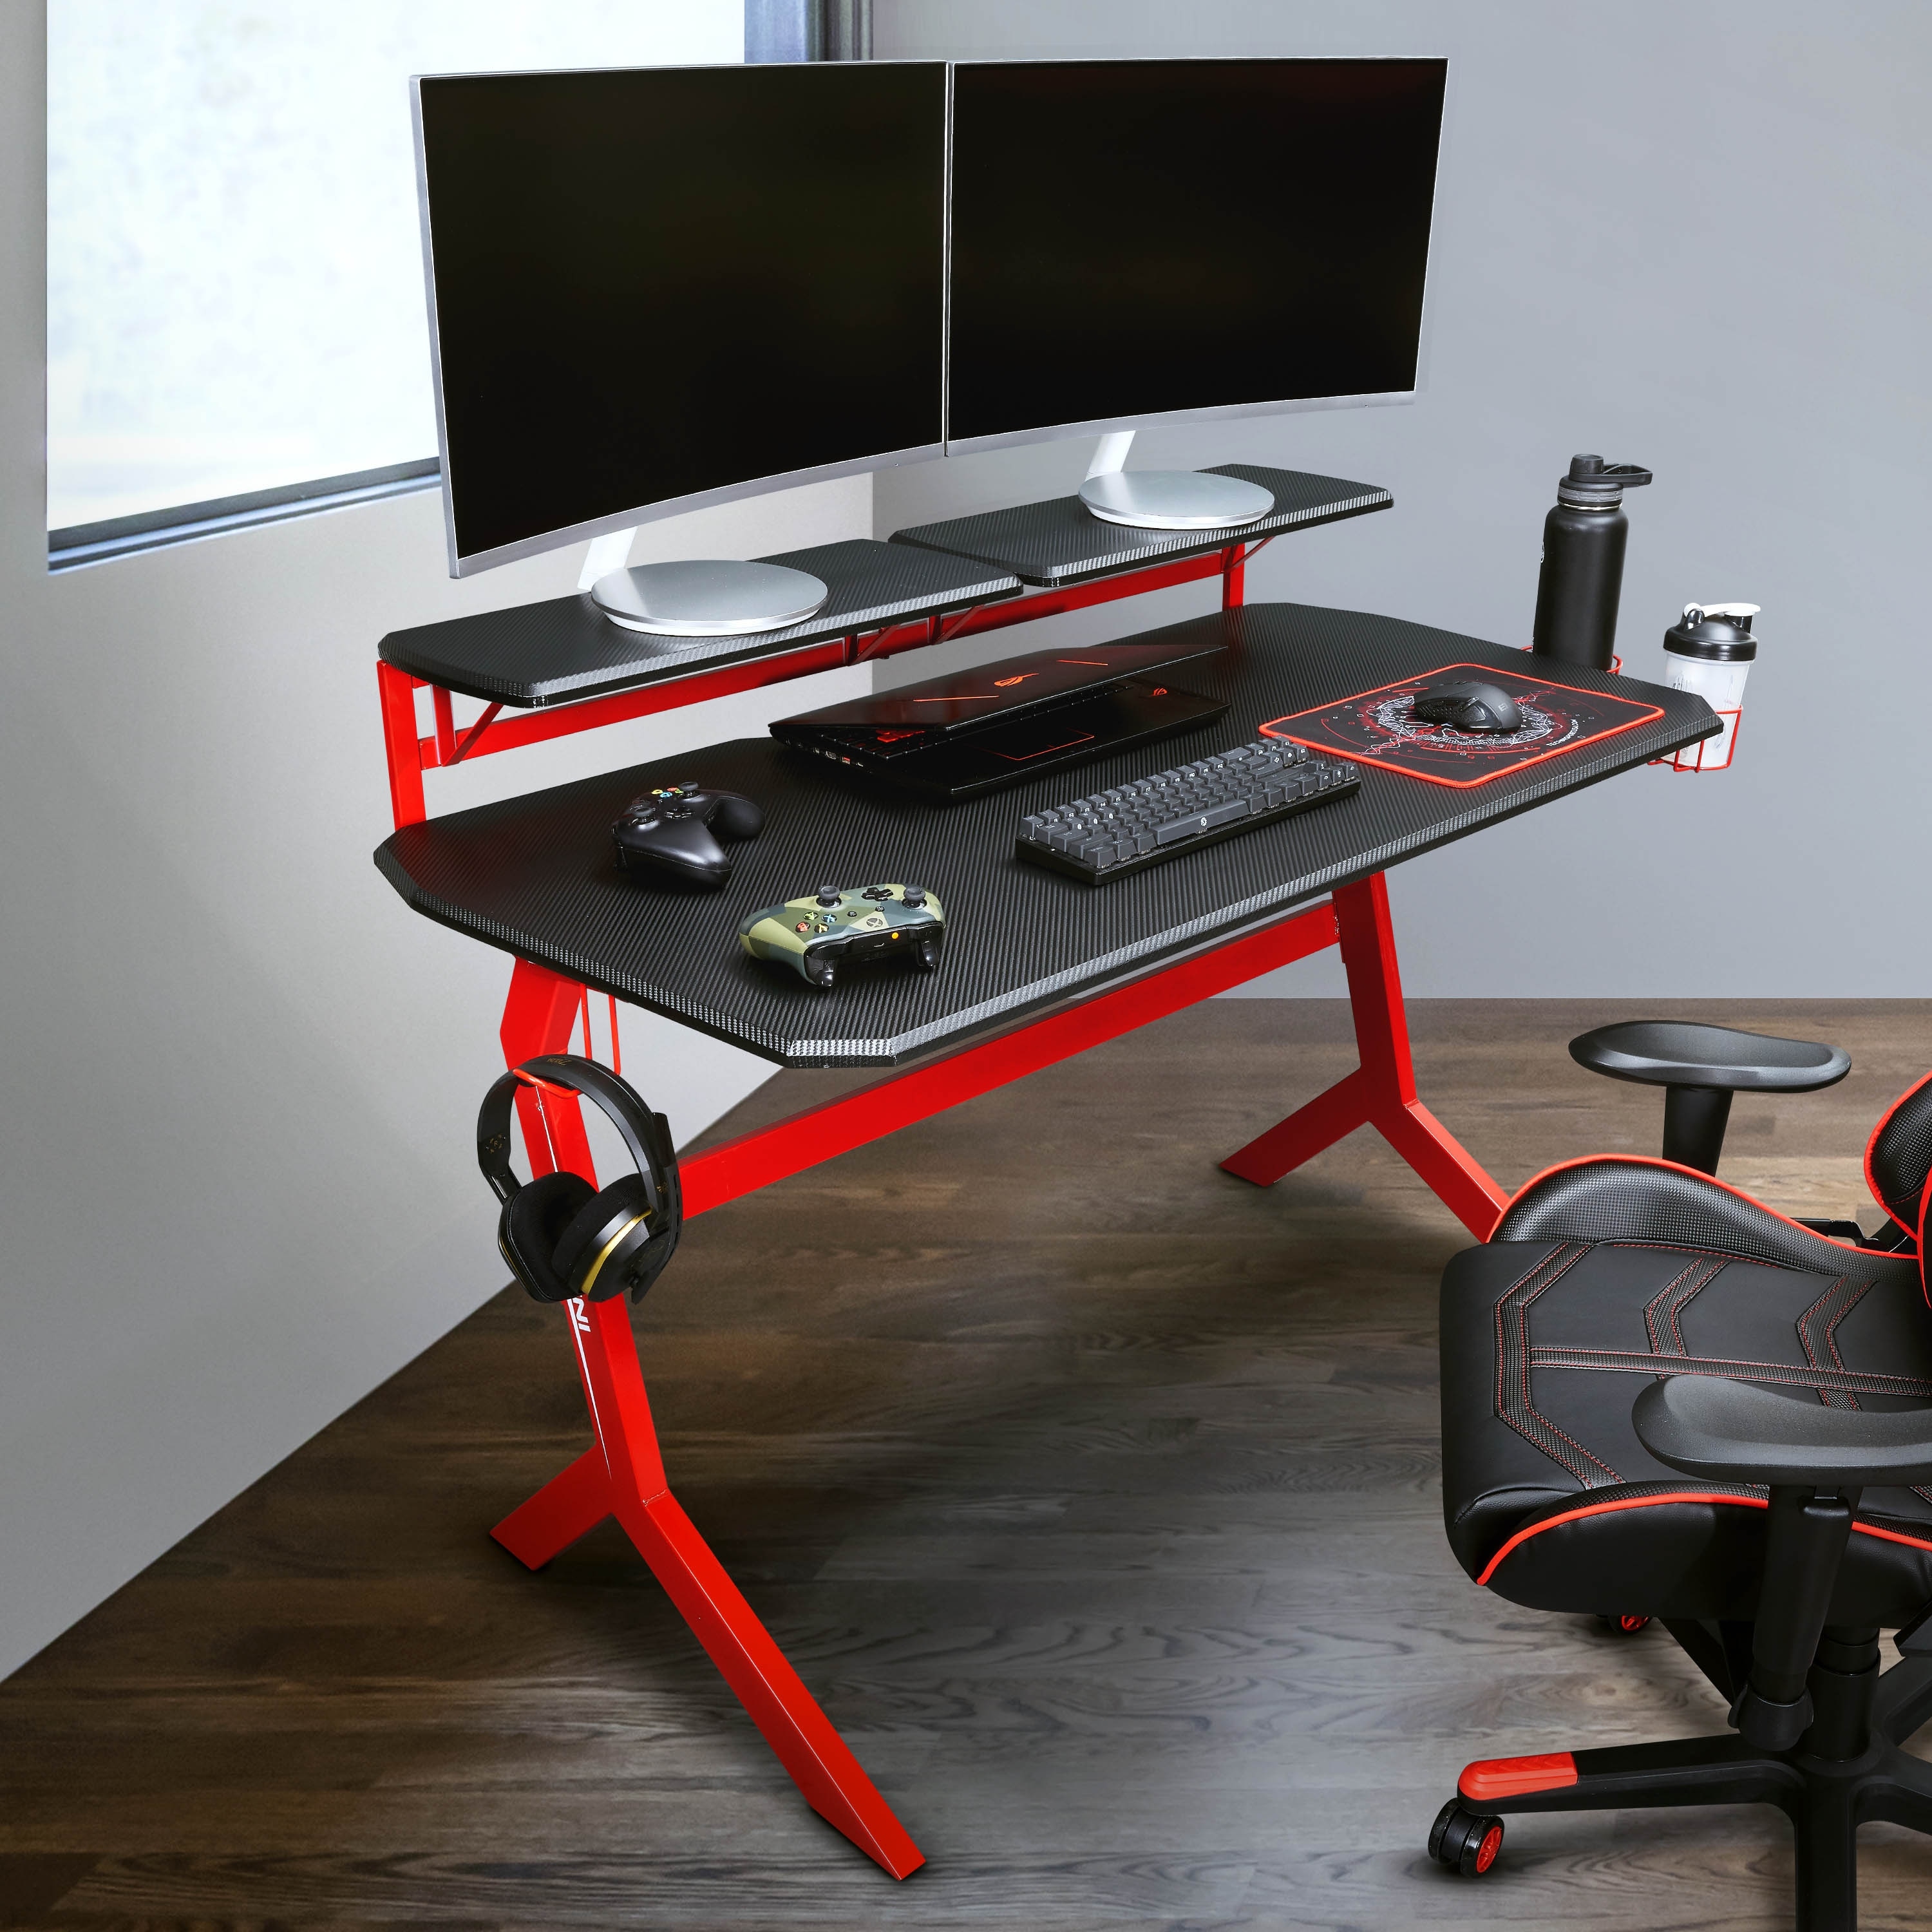 https://ak1.ostkcdn.com/images/products/is/images/direct/1c99b898c3ada4edf1405cd40a647c30361c9dbd/Sport-Gaming-Desk-Two-Way-Computer-Desk-with-Elevated-Monitor-Stands-CD-Rack-Cup-Holder-%26-Accessories-Storage-Laptop-Workstation.jpg